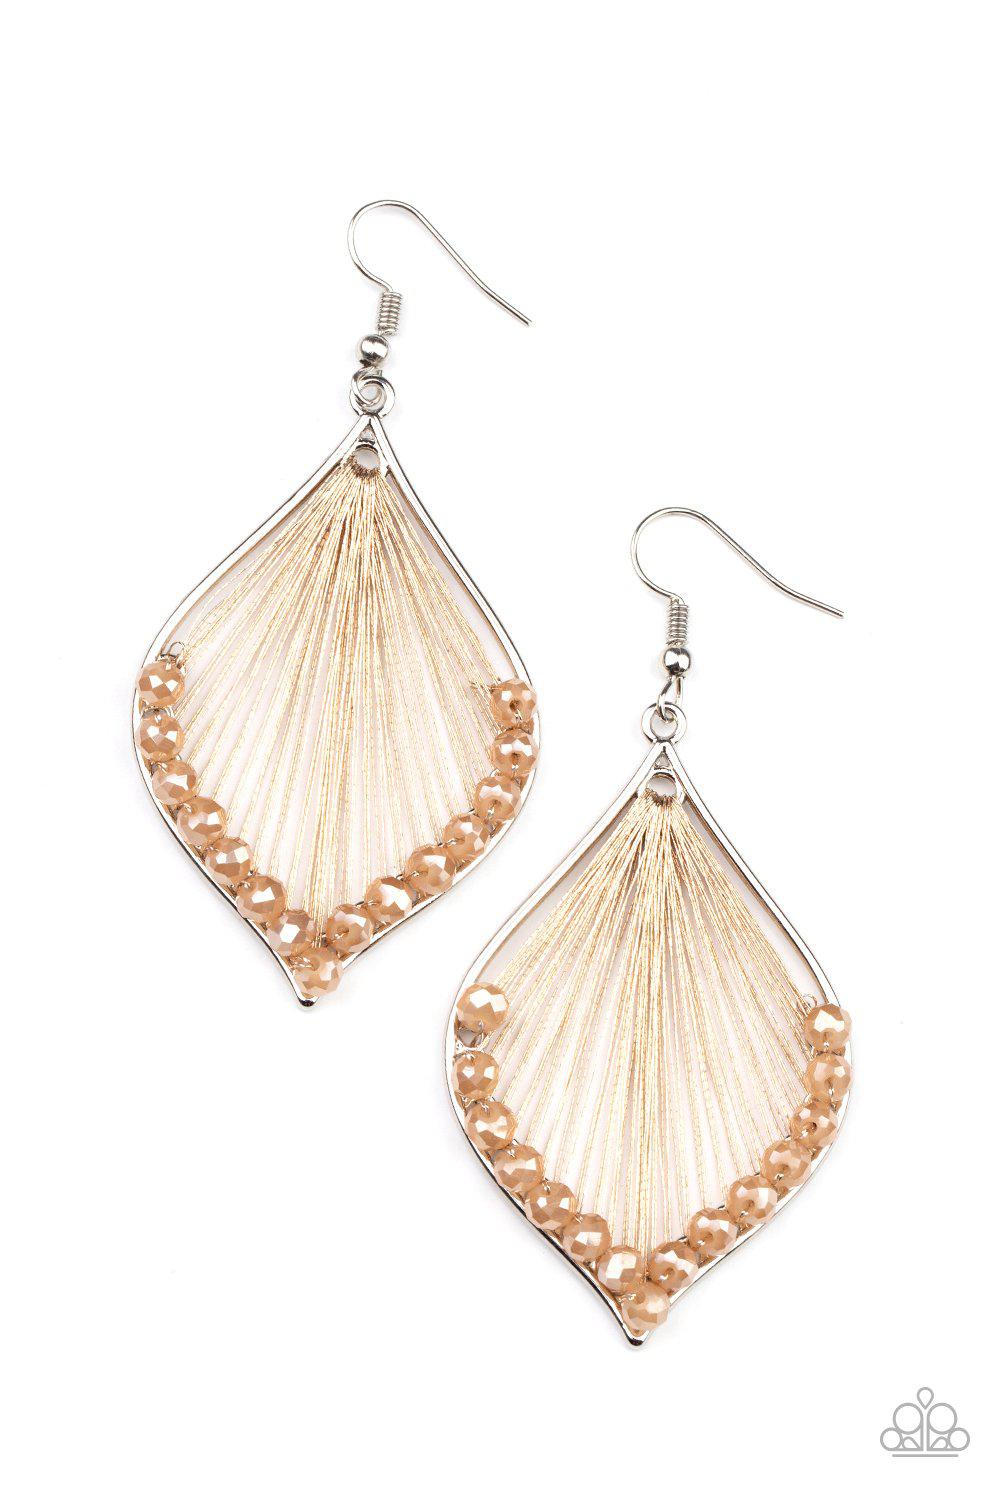 Pulling at My HARP-strings Brown Earrings - Paparazzi Accessories- lightbox - CarasShop.com - $5 Jewelry by Cara Jewels